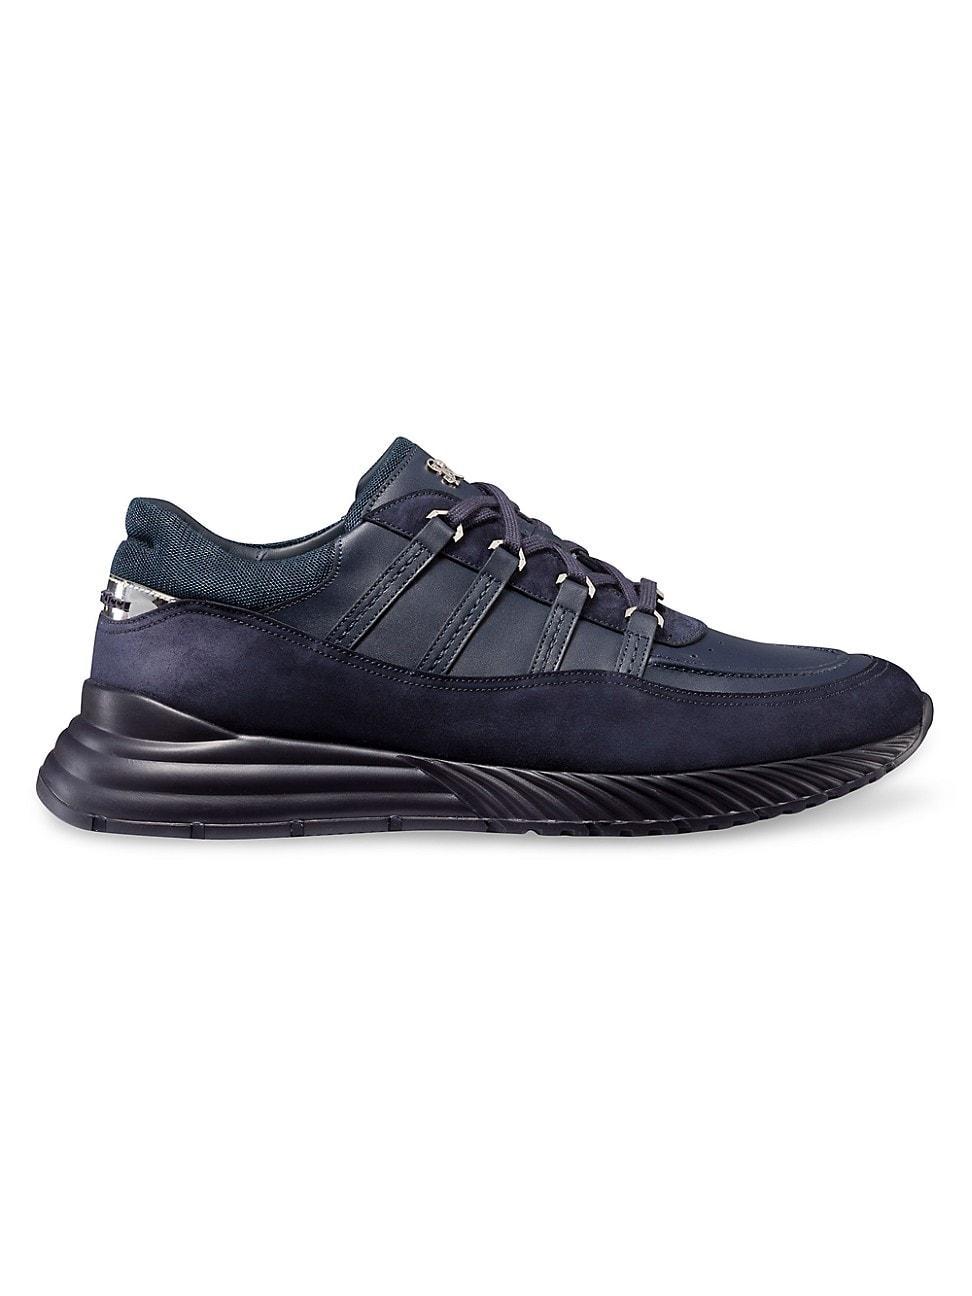 Mens Suede and Calfskin Leather Sneakers Product Image